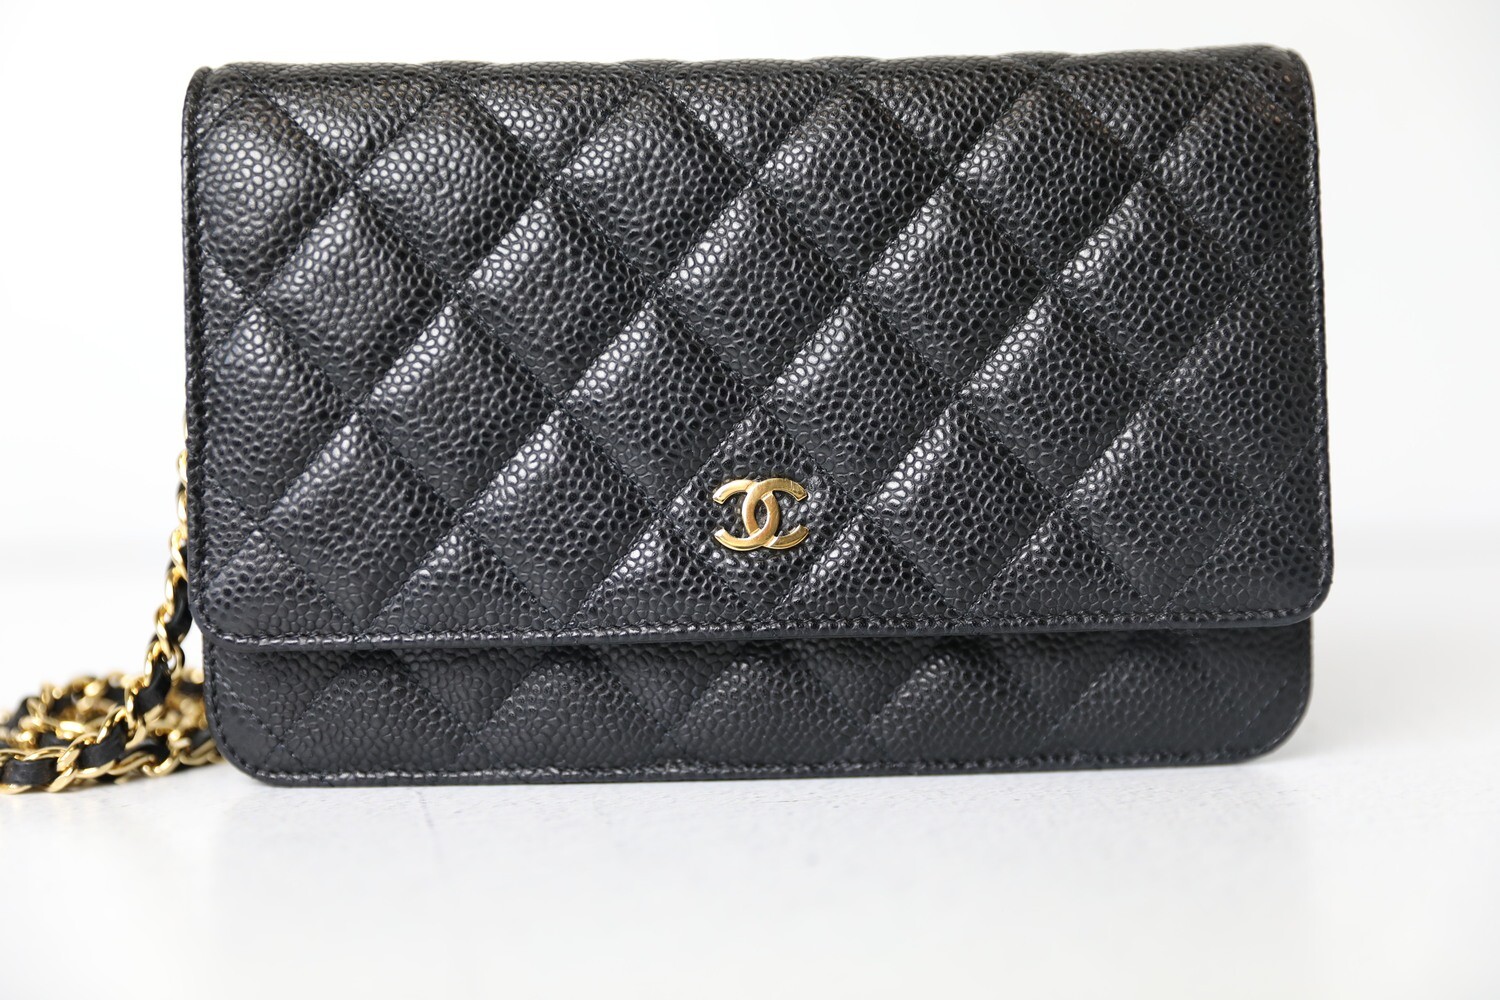 Chanel Zip Top Card Holder, Black Leather, Preowned, WA001